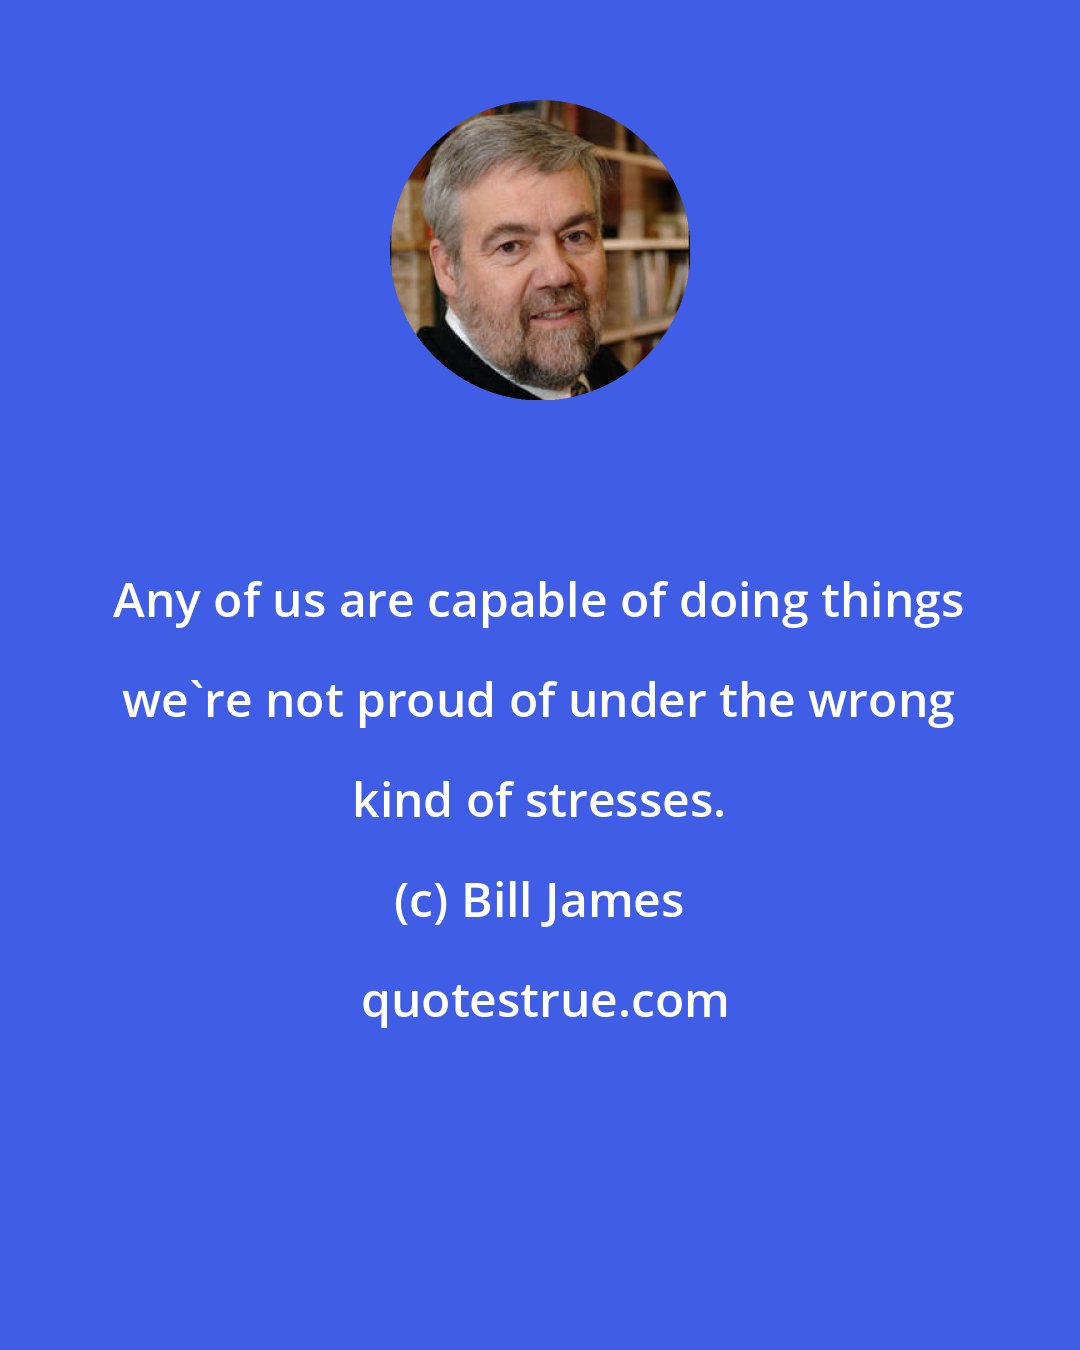 Bill James: Any of us are capable of doing things we're not proud of under the wrong kind of stresses.